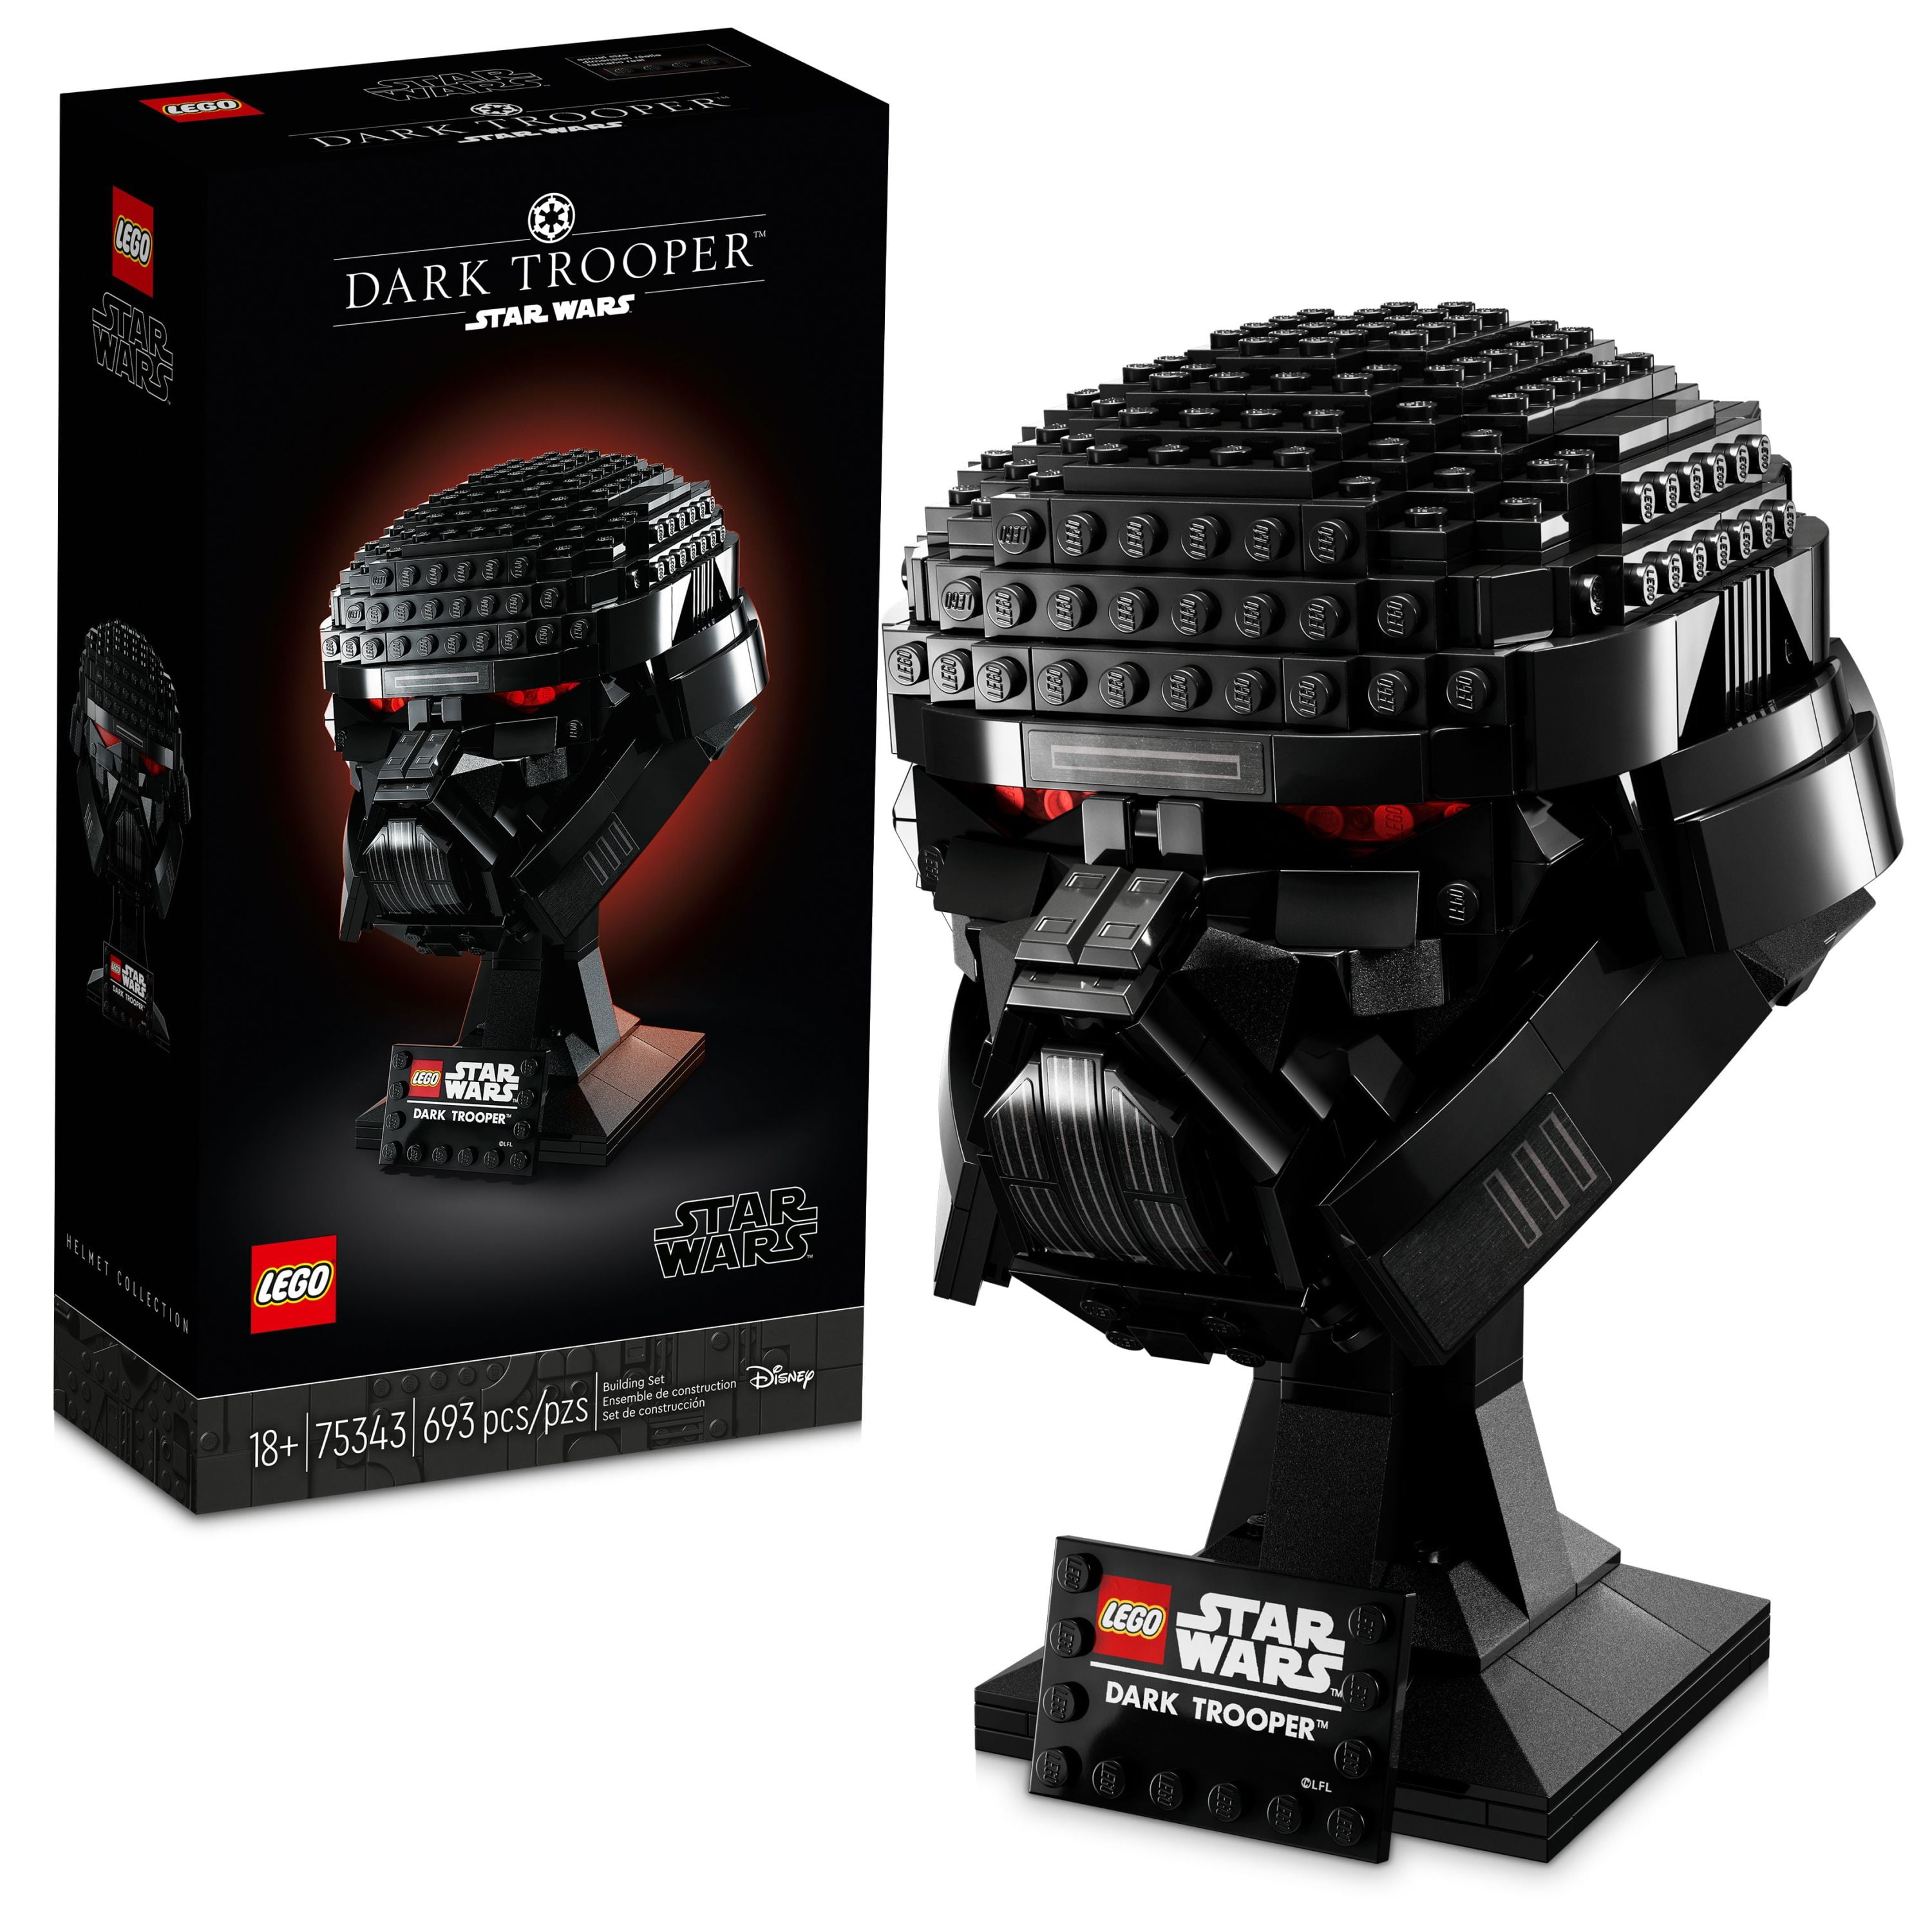 Wars Dark Trooper Helmet 75343 Buildable Model Kit, Collectible Decoration Set for Adults, Collection Gift Idea - Walmart.com